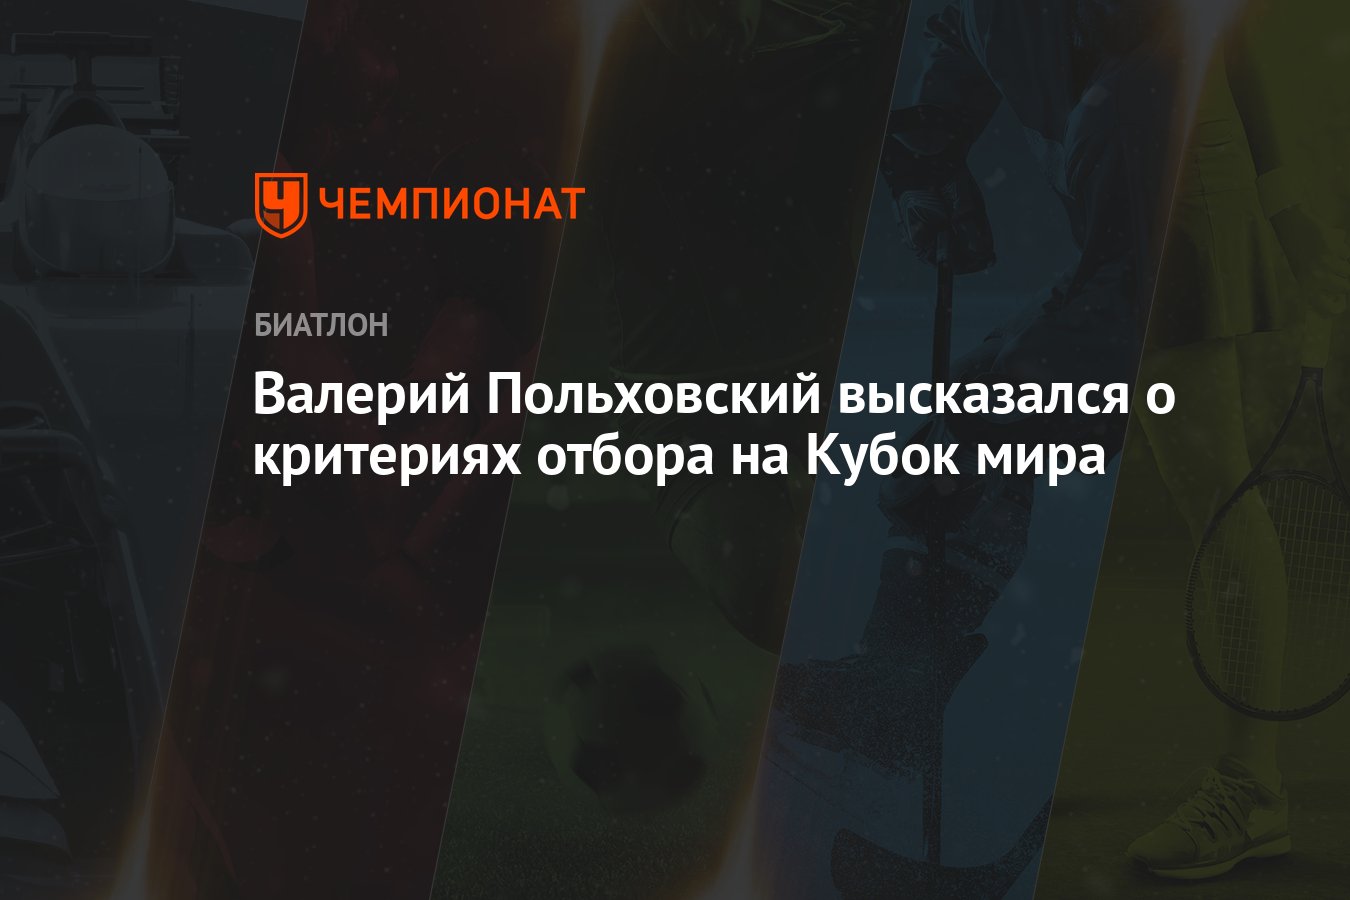 Valery Polkhovsky spoke about the selection criteria for the World Cup thumbnail